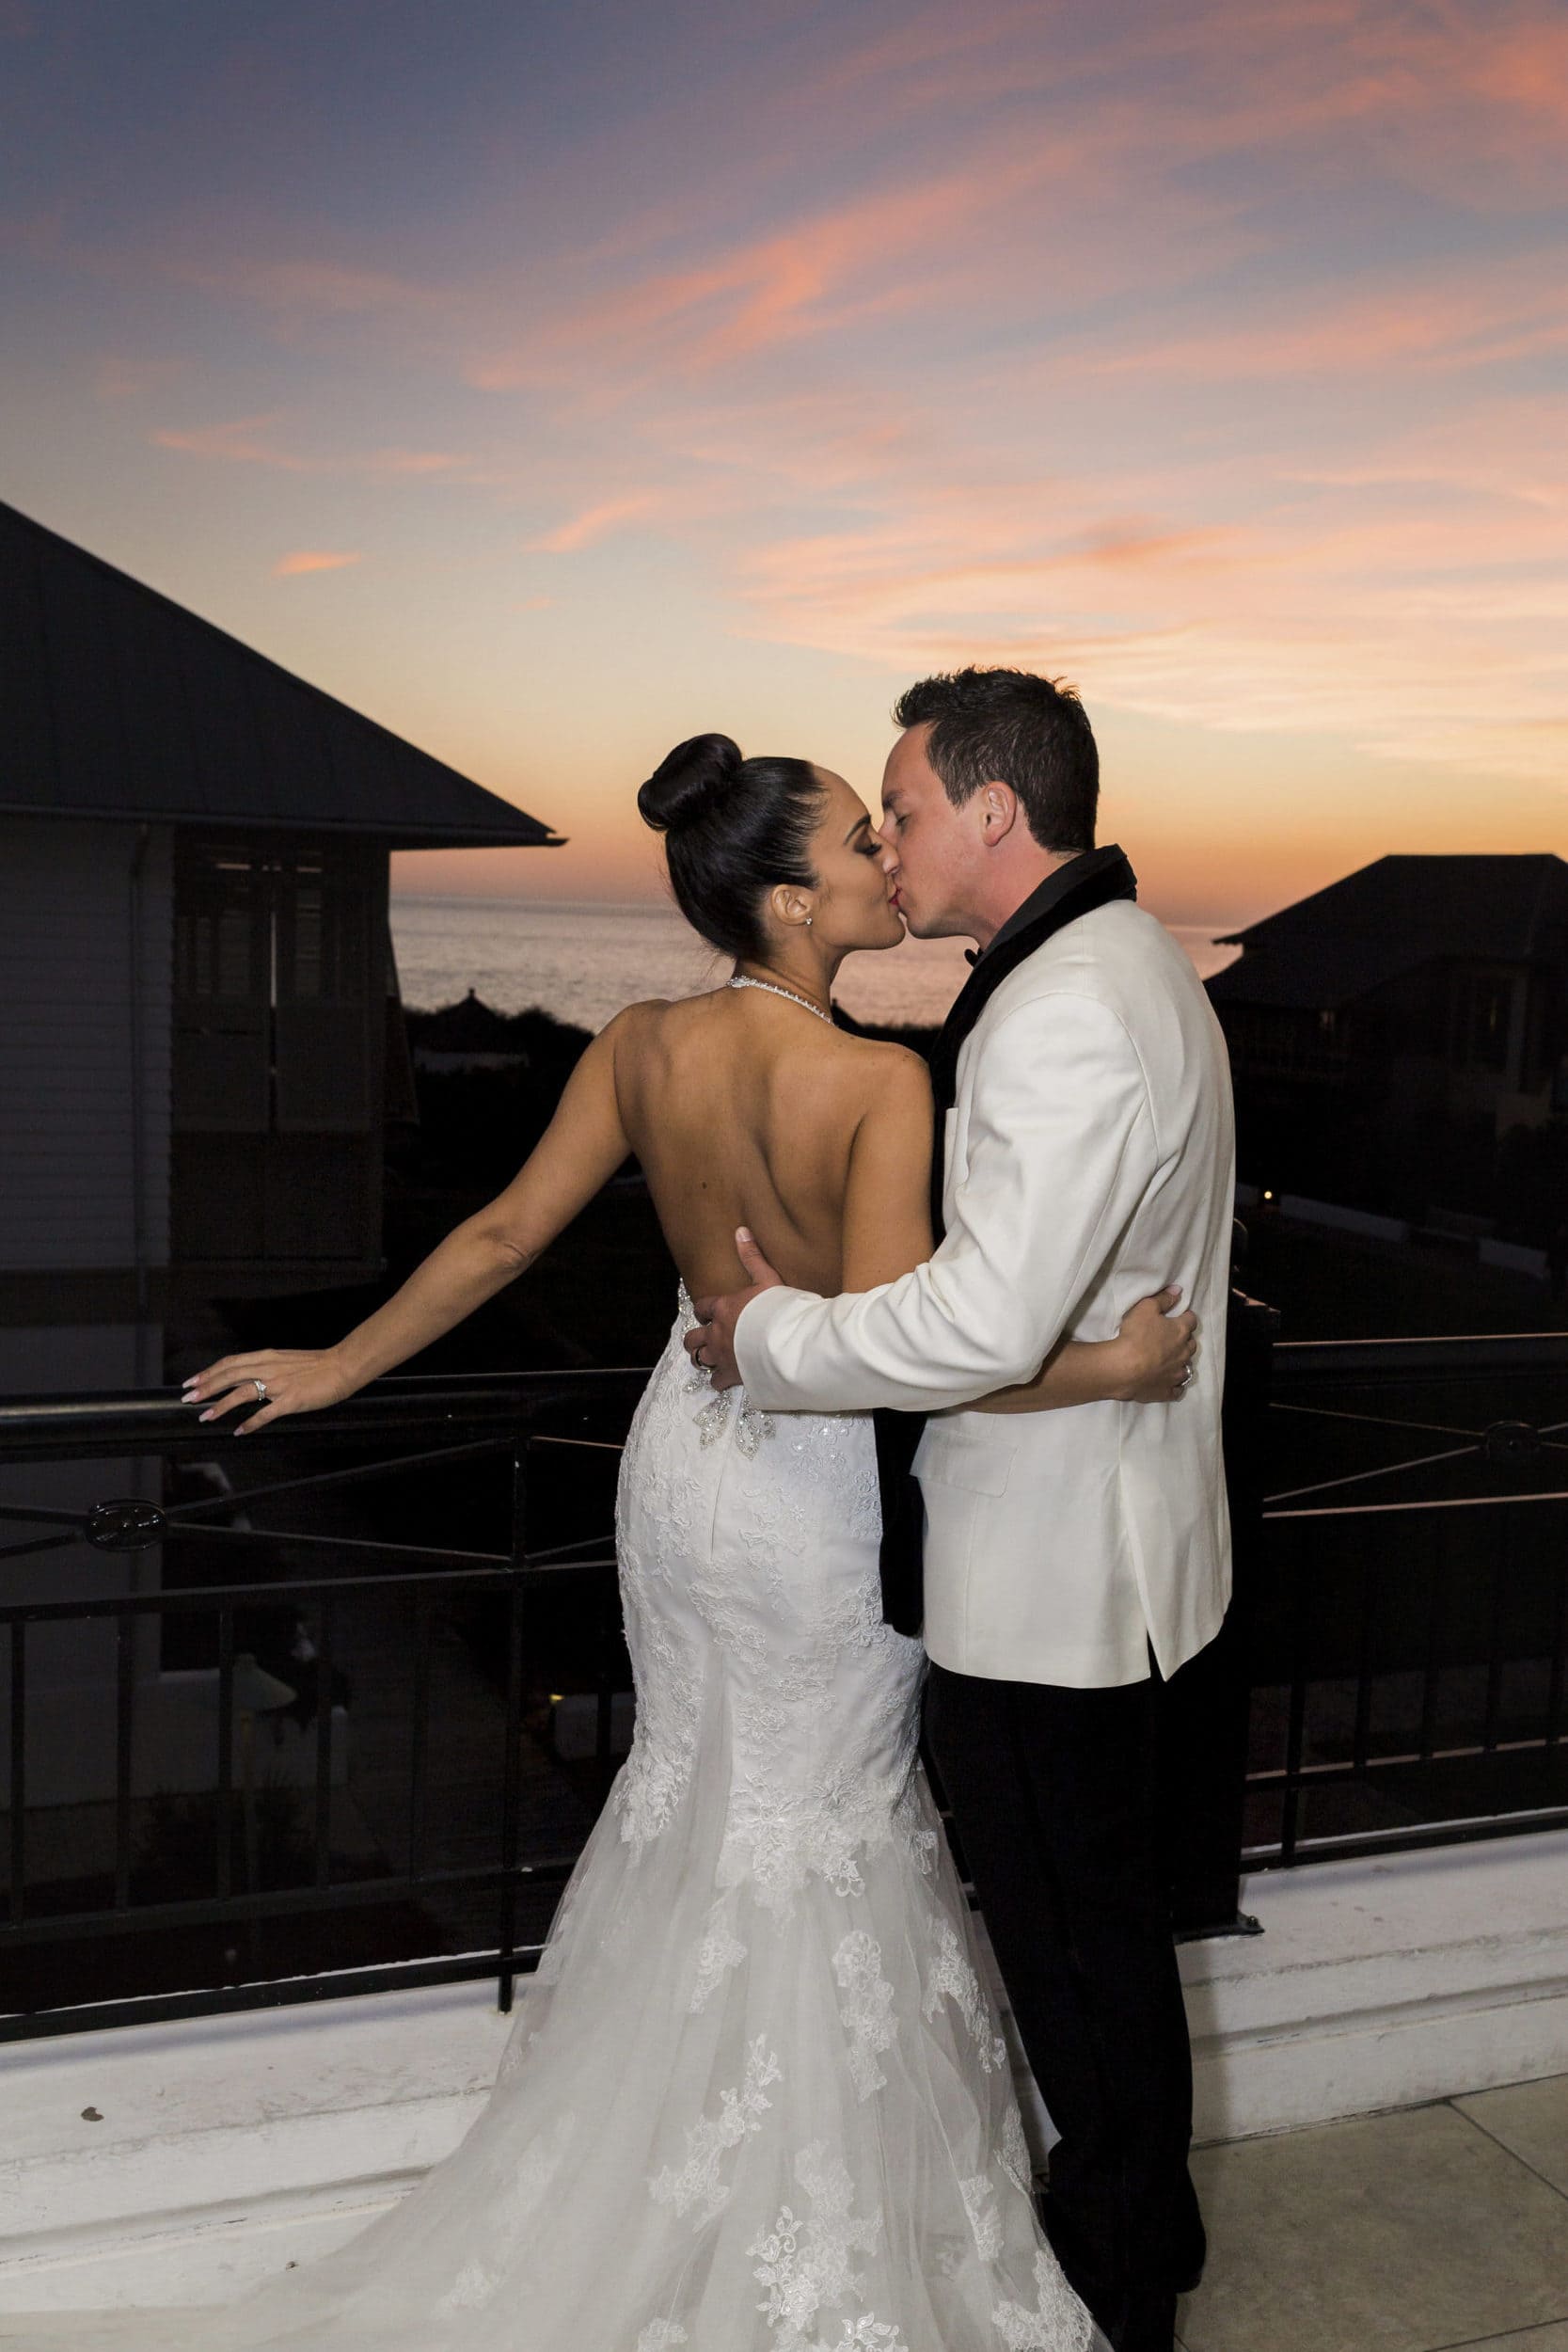 rosemary beach sunset picture with bride and groom kissing